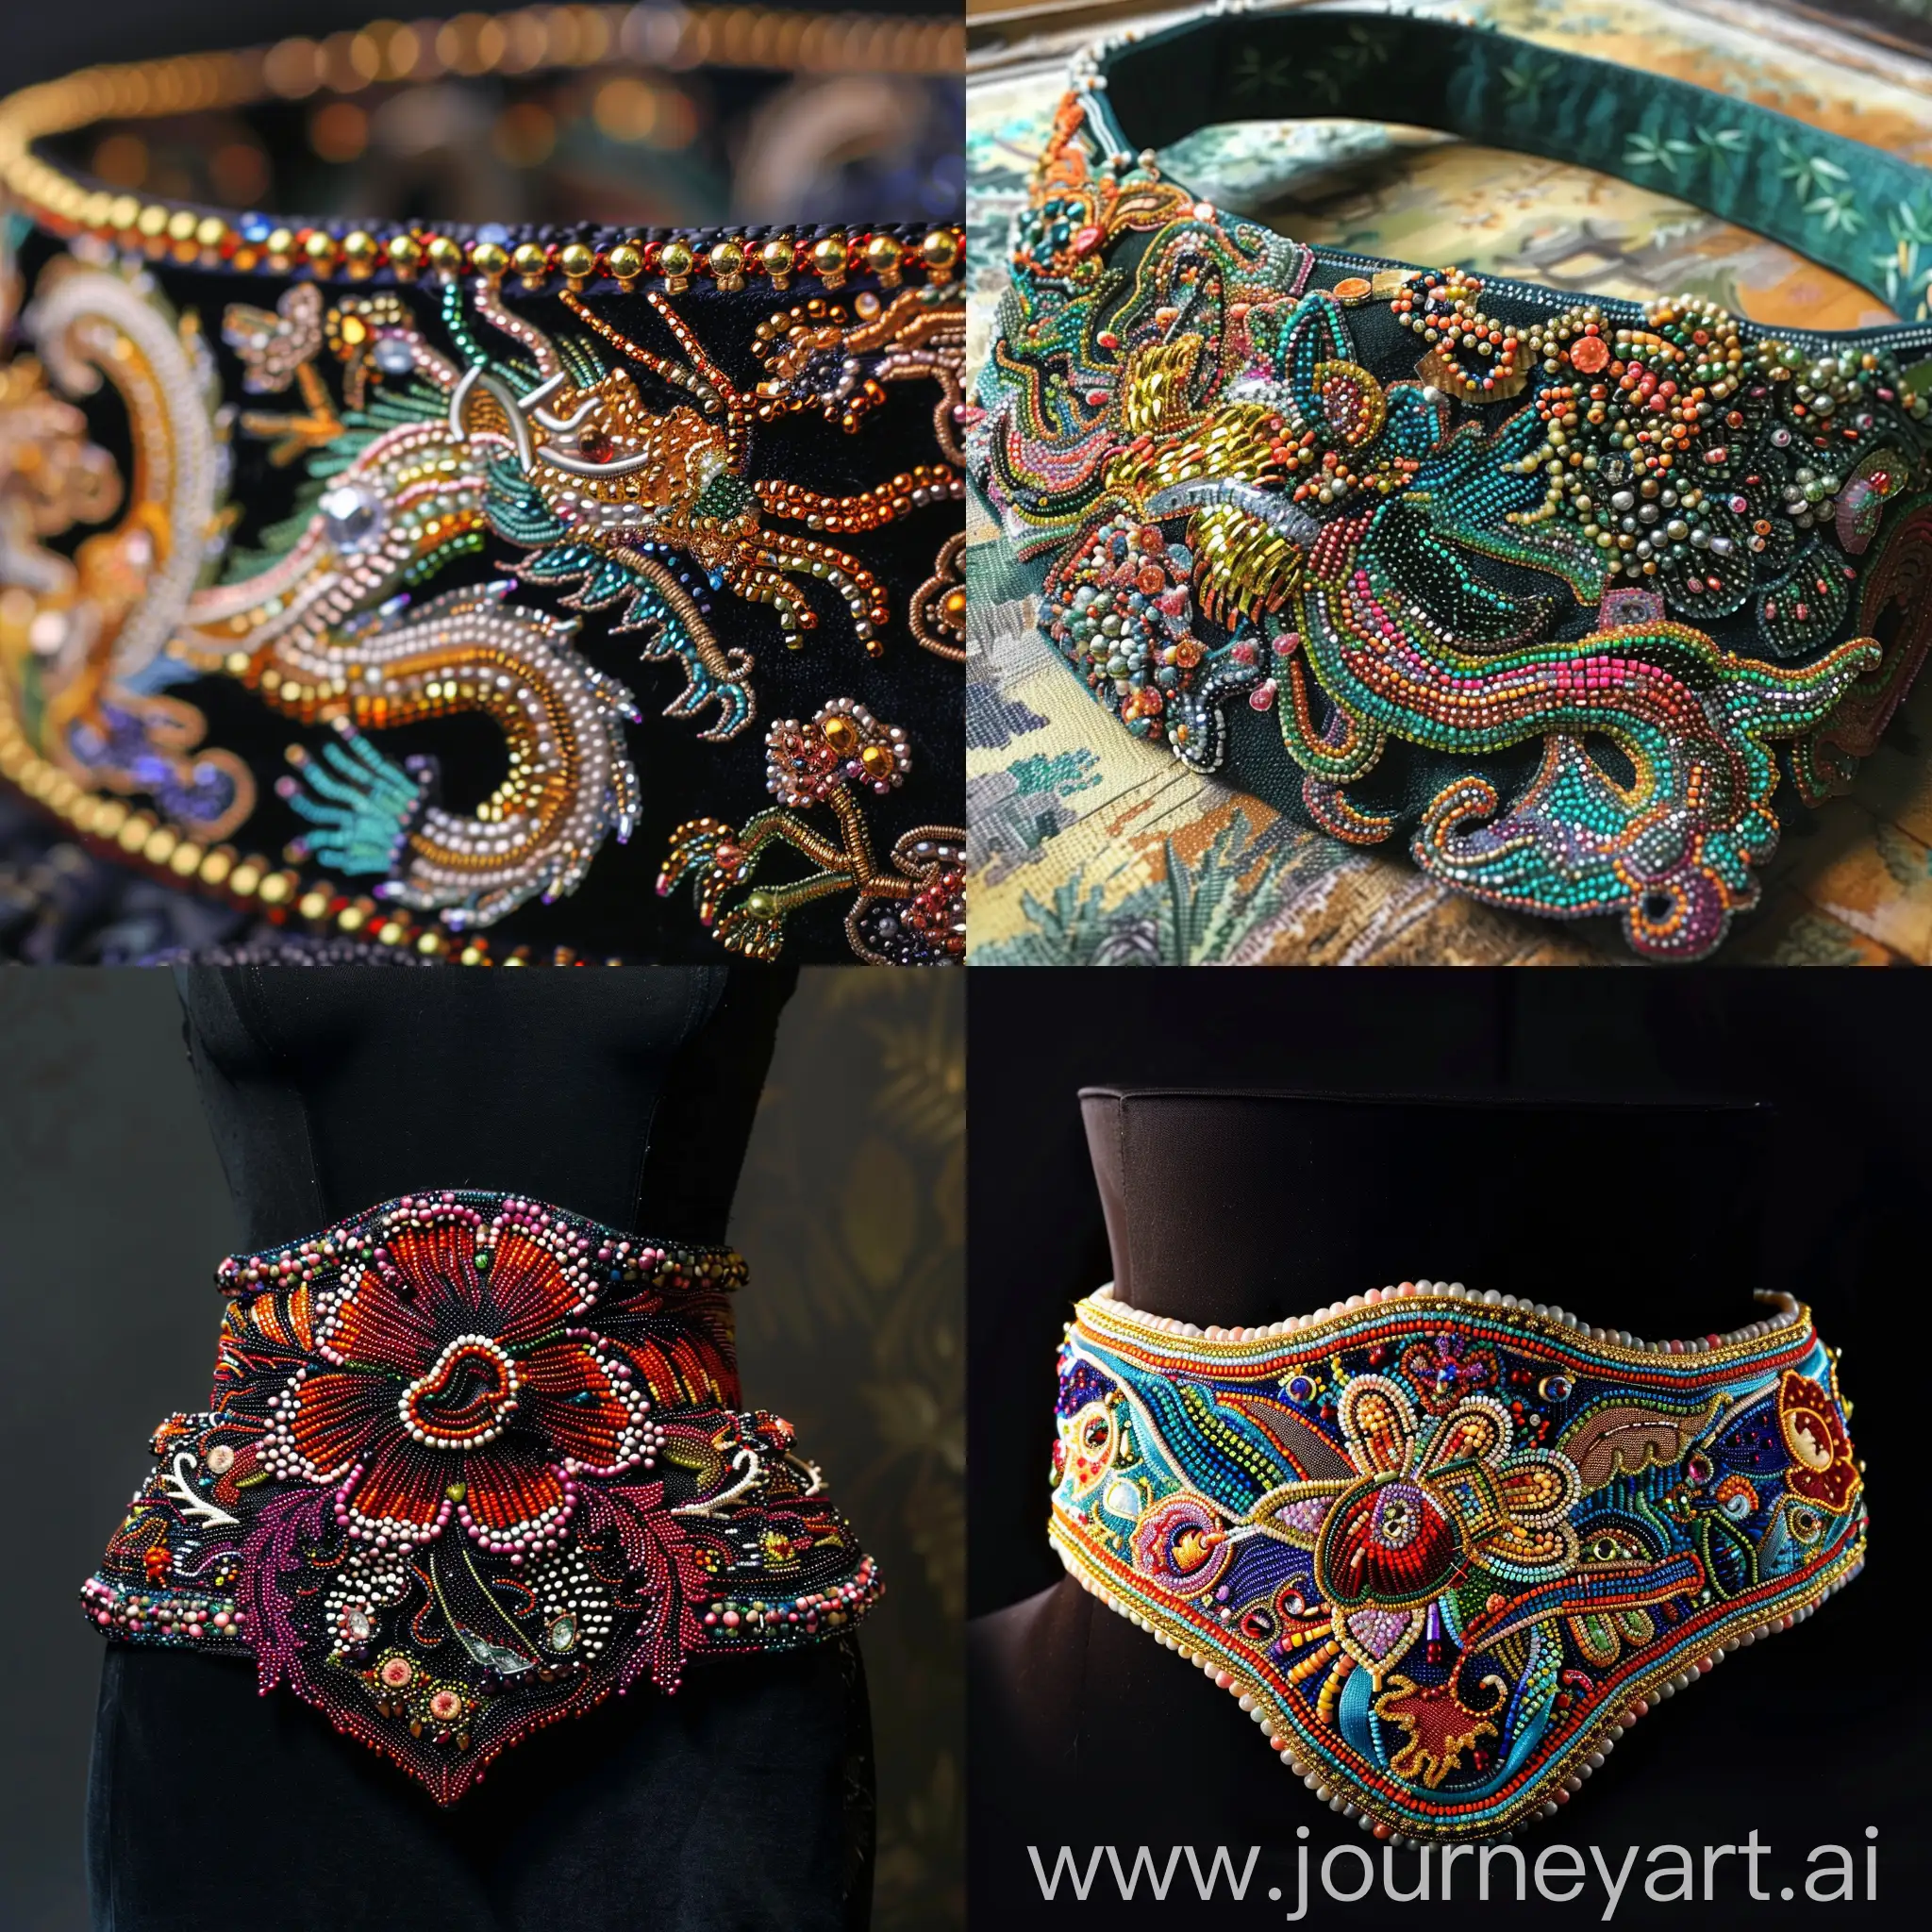 Fashionable-Belt-Design-with-Pipa-and-Bead-Embellishments